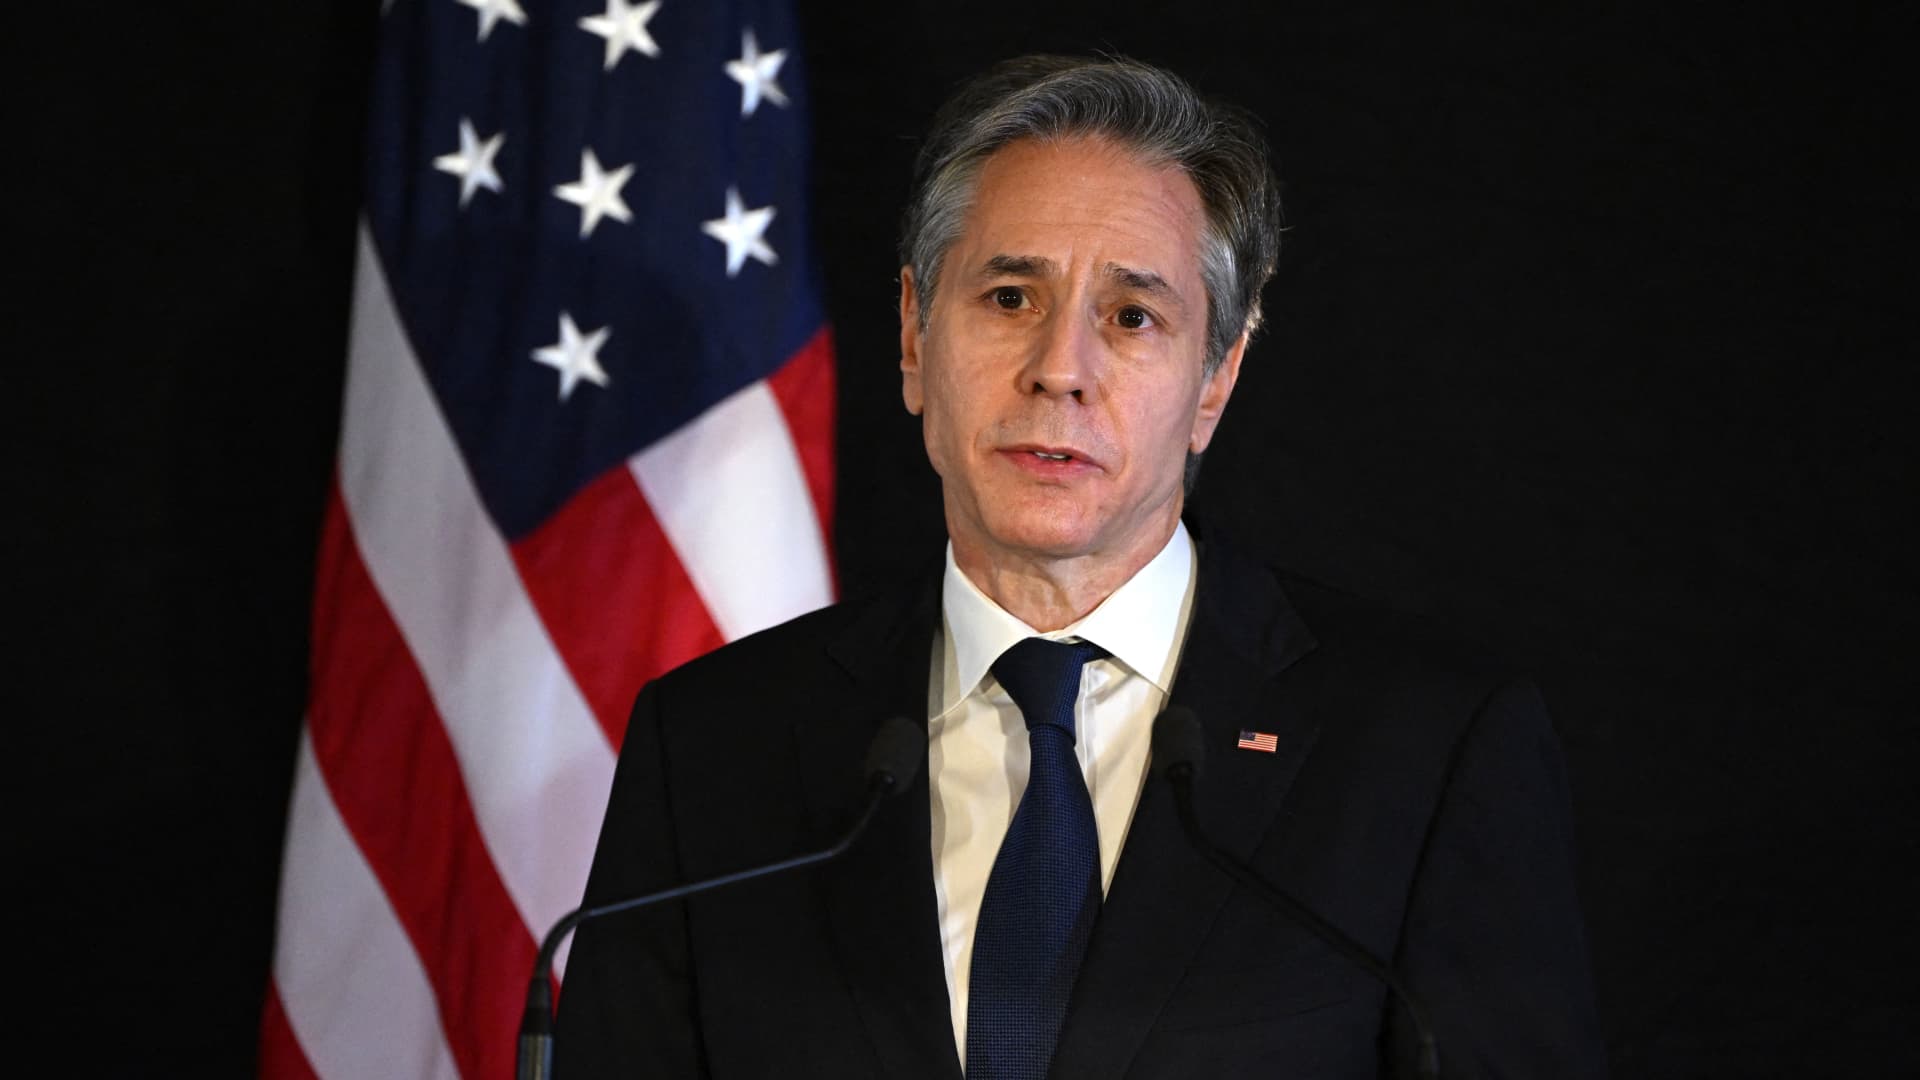 US Secretary of State Antony Blinken gives a press conference in Geneva on January 21, 2022 after meeting Russian Foreign Minister.